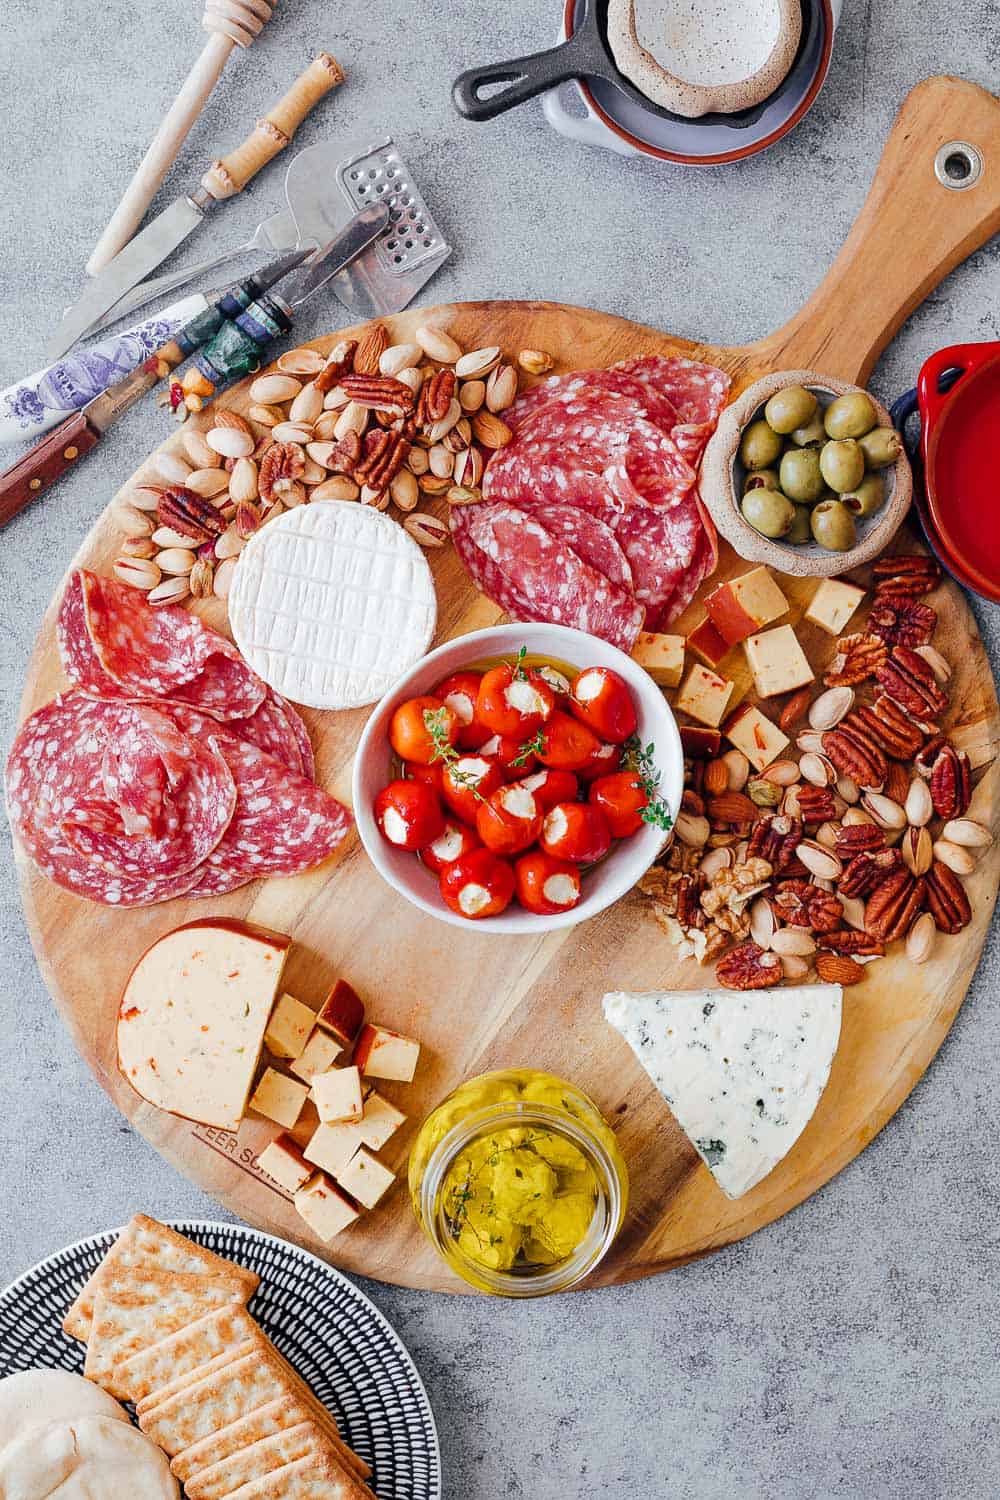 Step #4 is to add salty nibbles such as olives, stuffed peppers, labneh etc to the ultimate wine and cheese board. Pick things that are already in your pantry so that you don't spend on anything additional